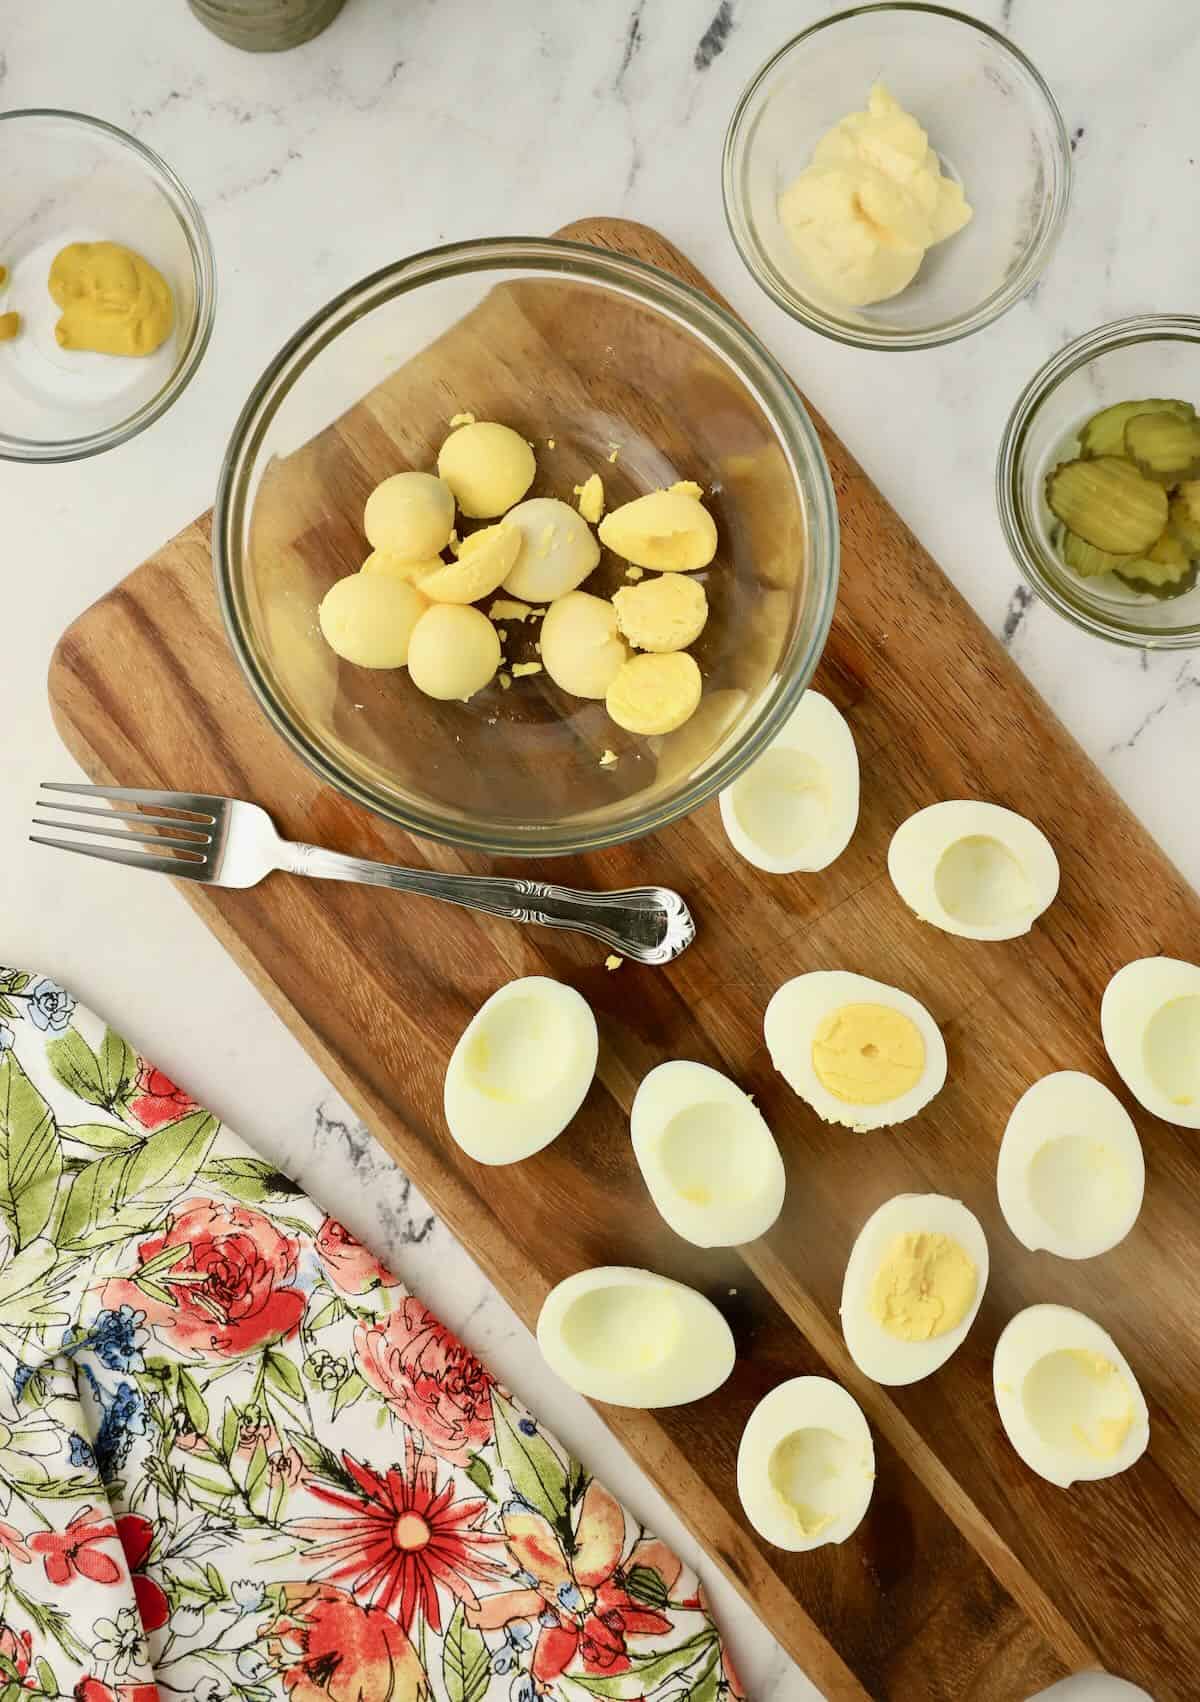 Hard boiled eggs sliced in half and the yolks in a bowl. 